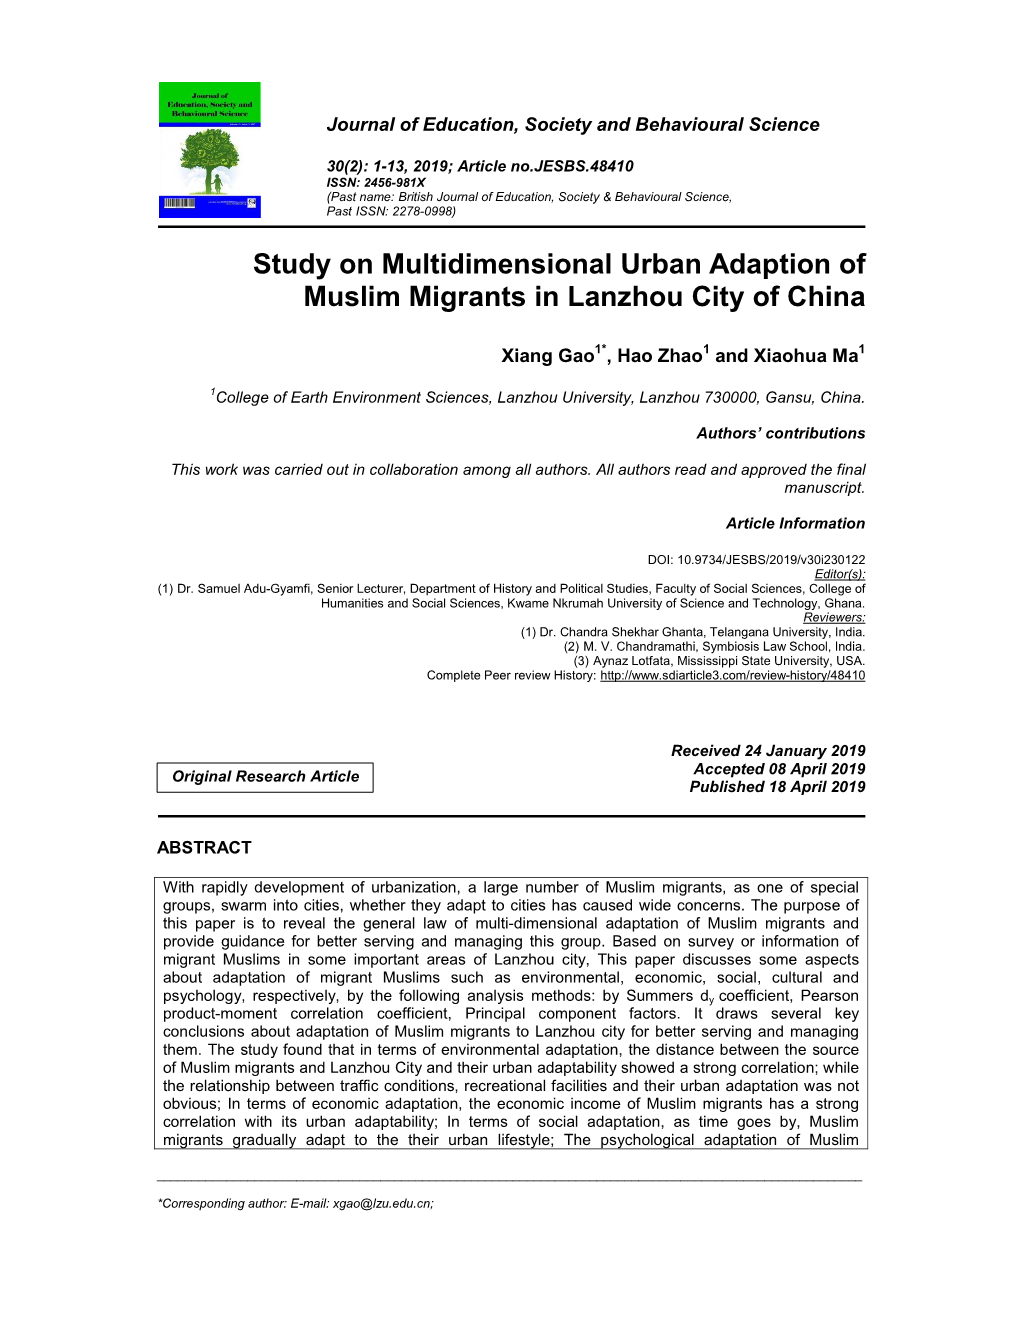 Study on Multidimensional Urban Adaption of Muslim Migrants in Lanzhou City of China